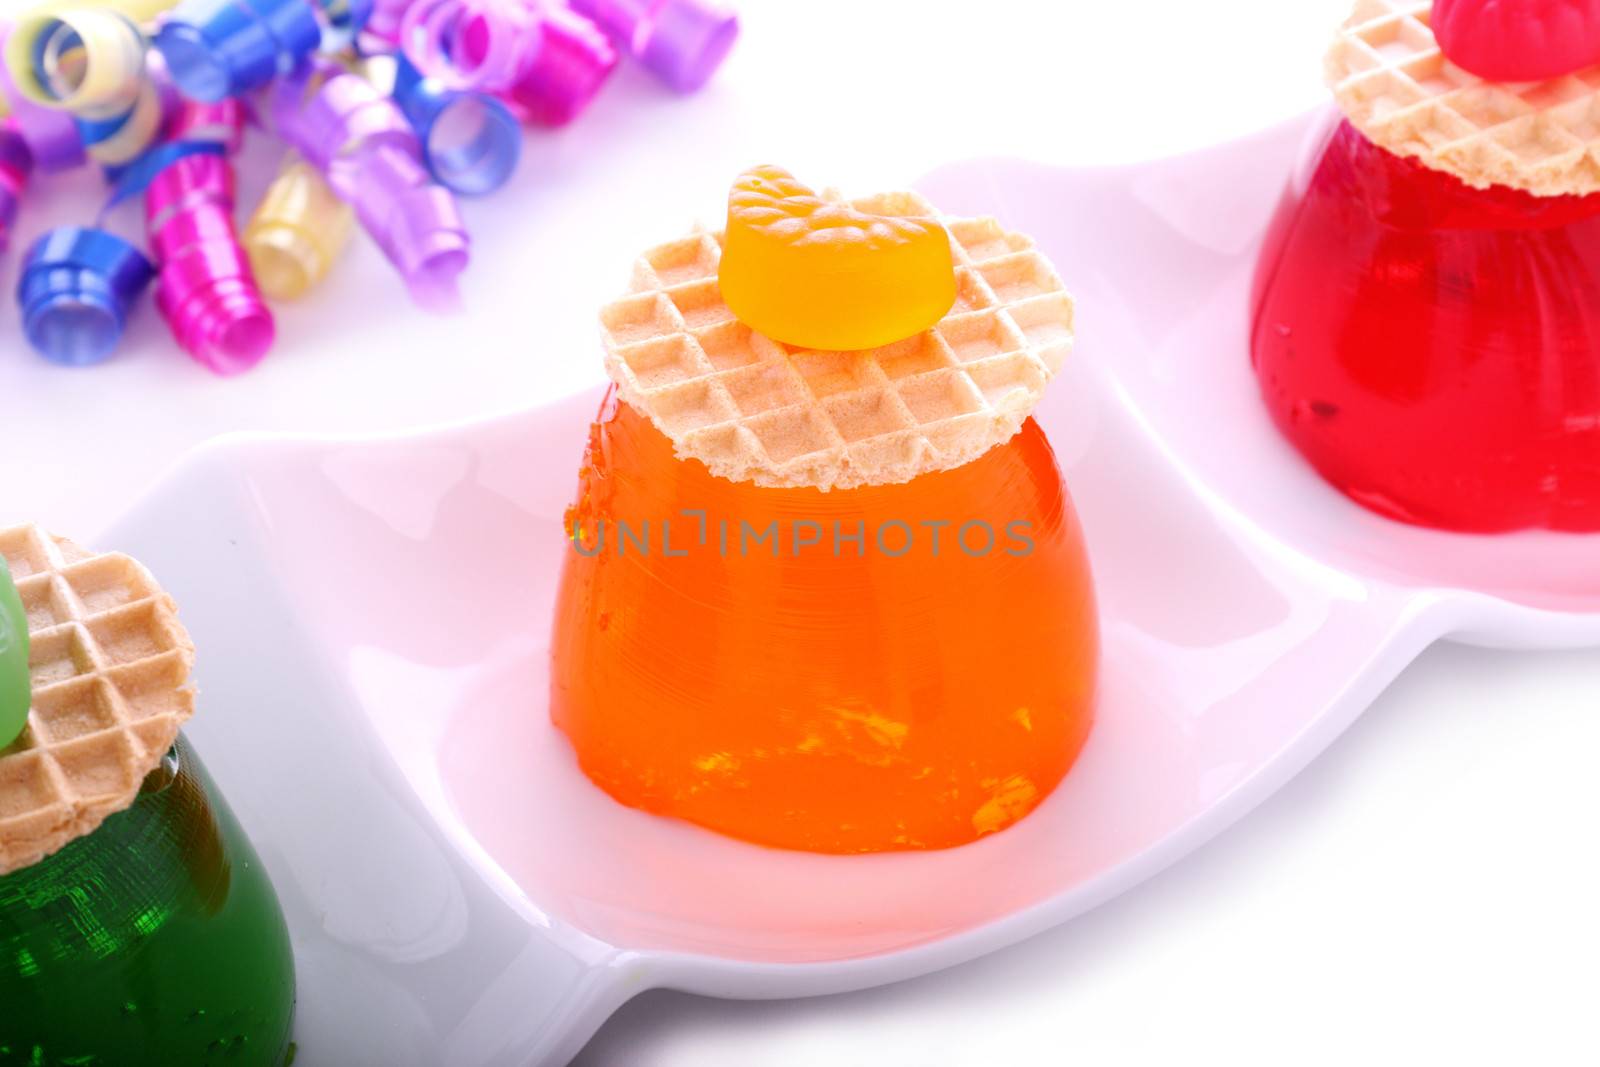 Delicious orange jelly with candy and wafer on top.